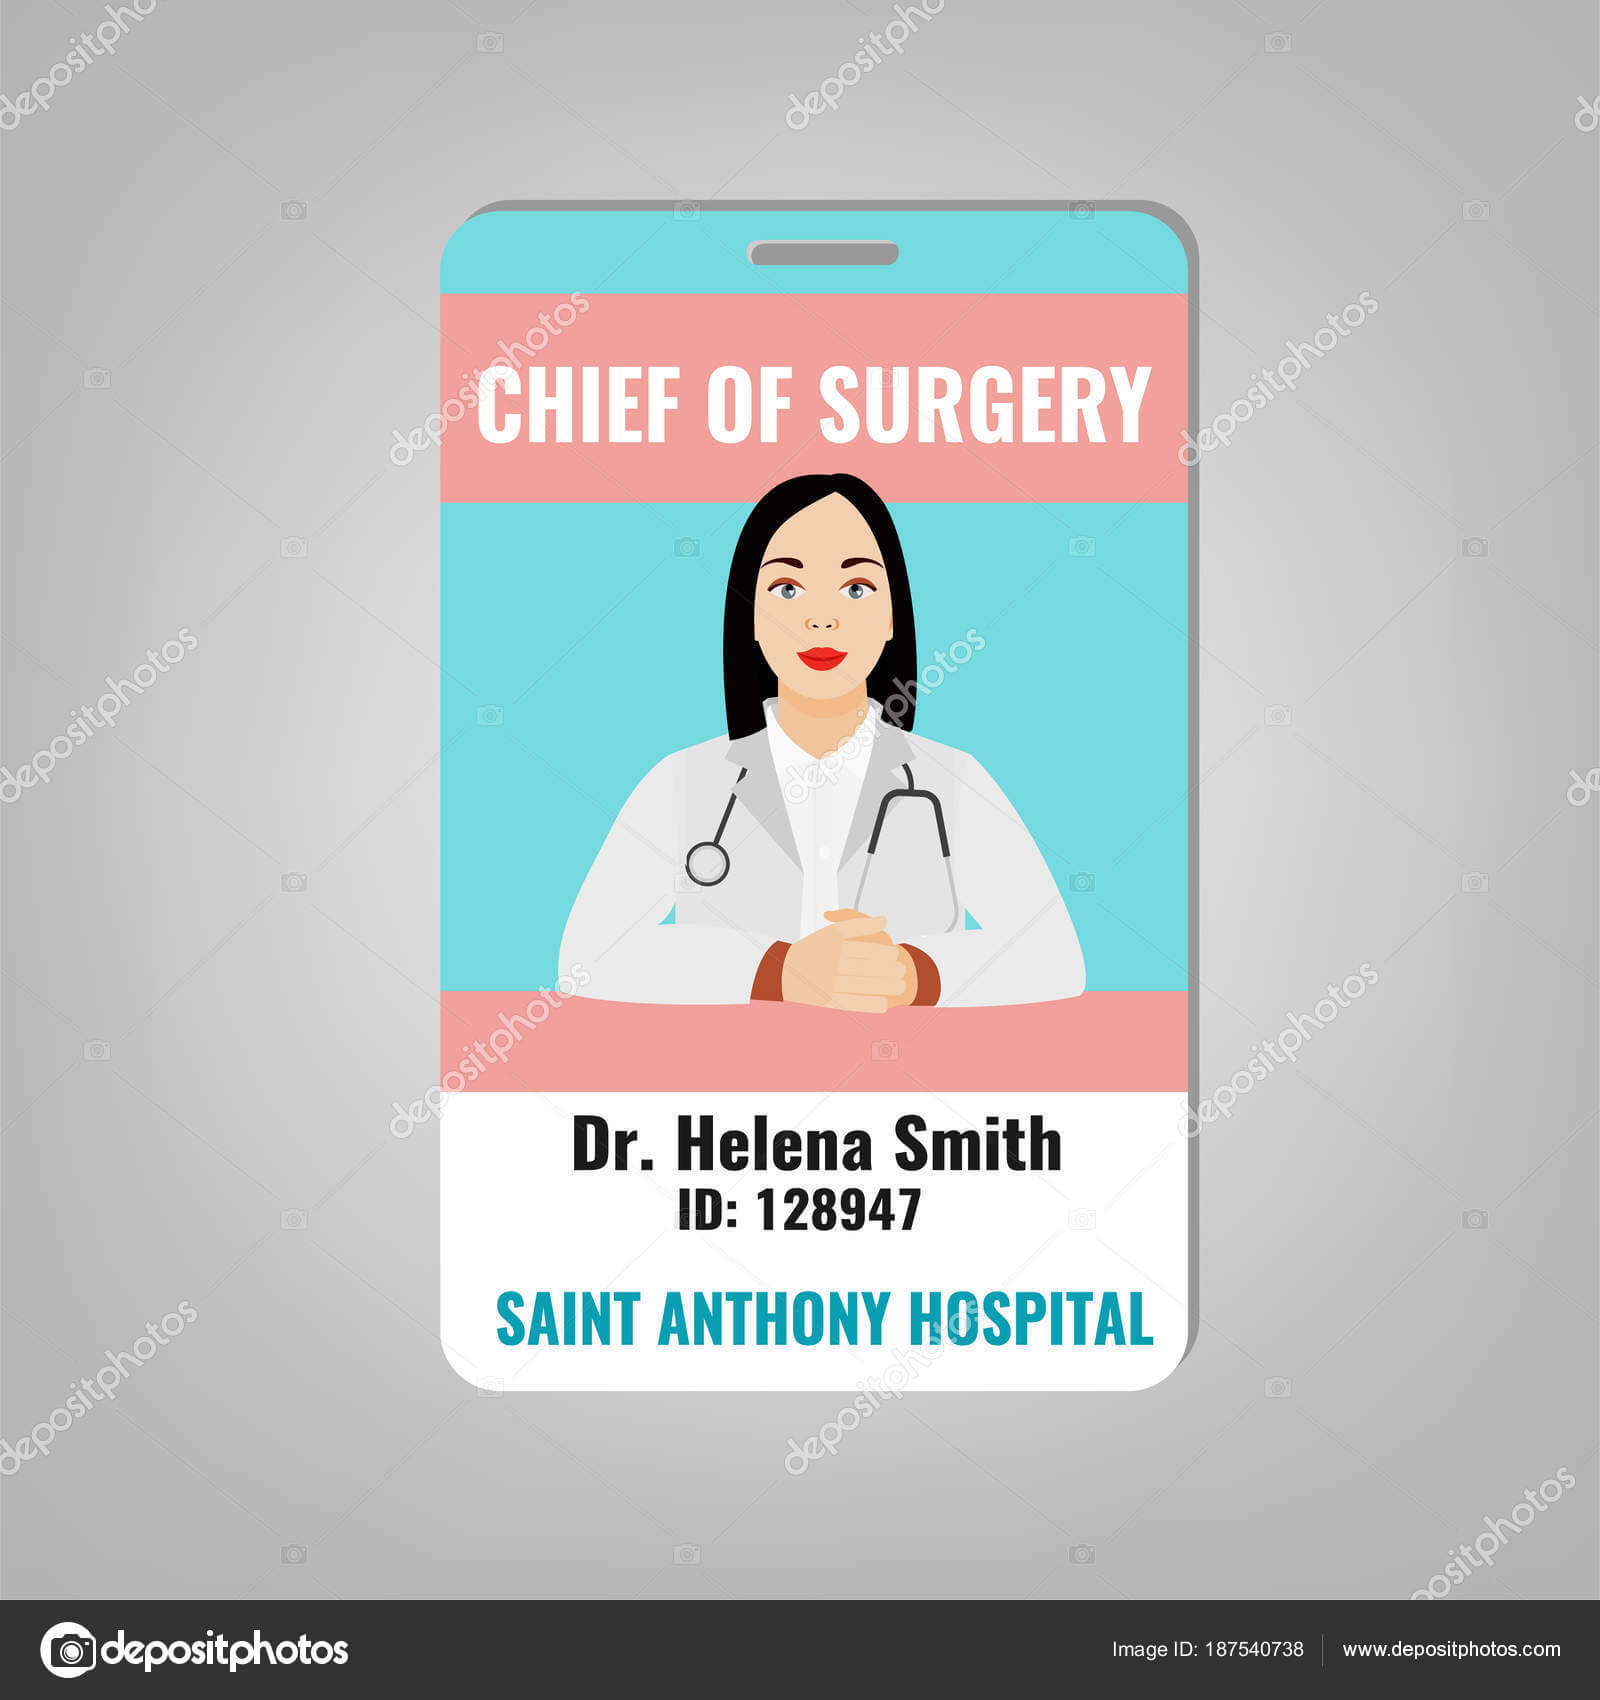 Doctor Id Card — Stock Vector © Annyart #187540738 In Doctor Id Card Template